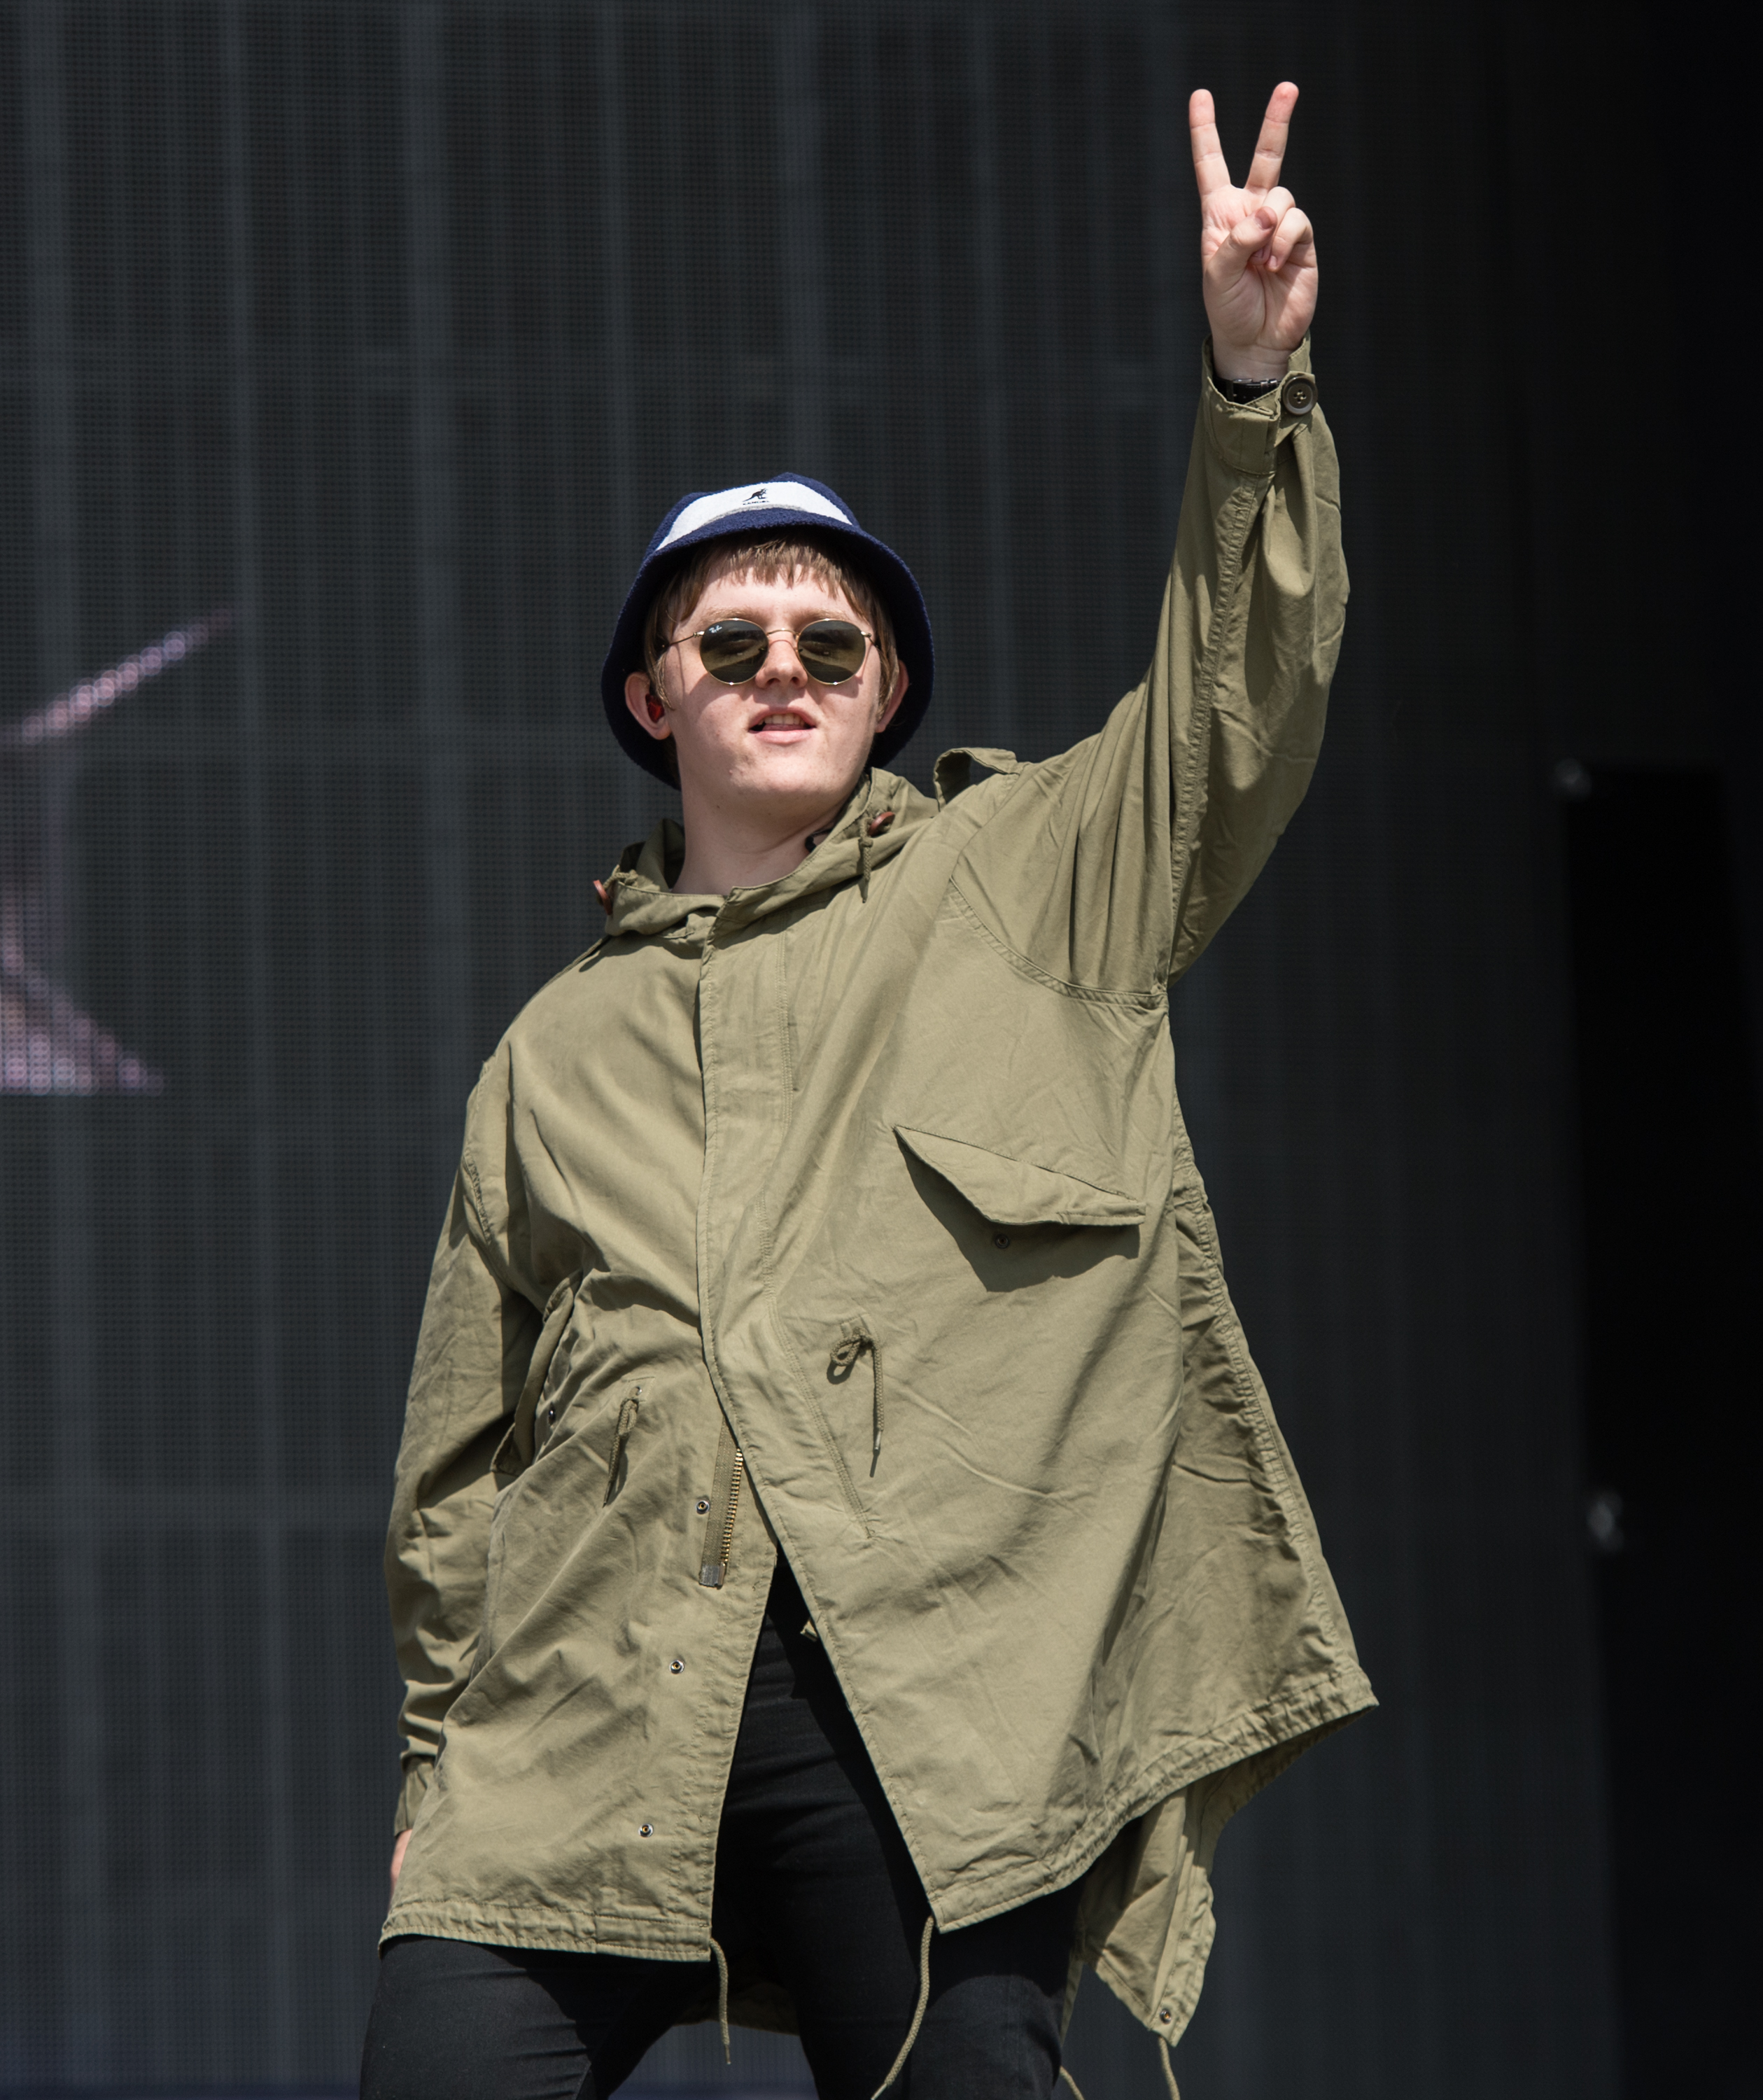 Lewis Capaldi walked out on the stage dressed as the Oasis legend